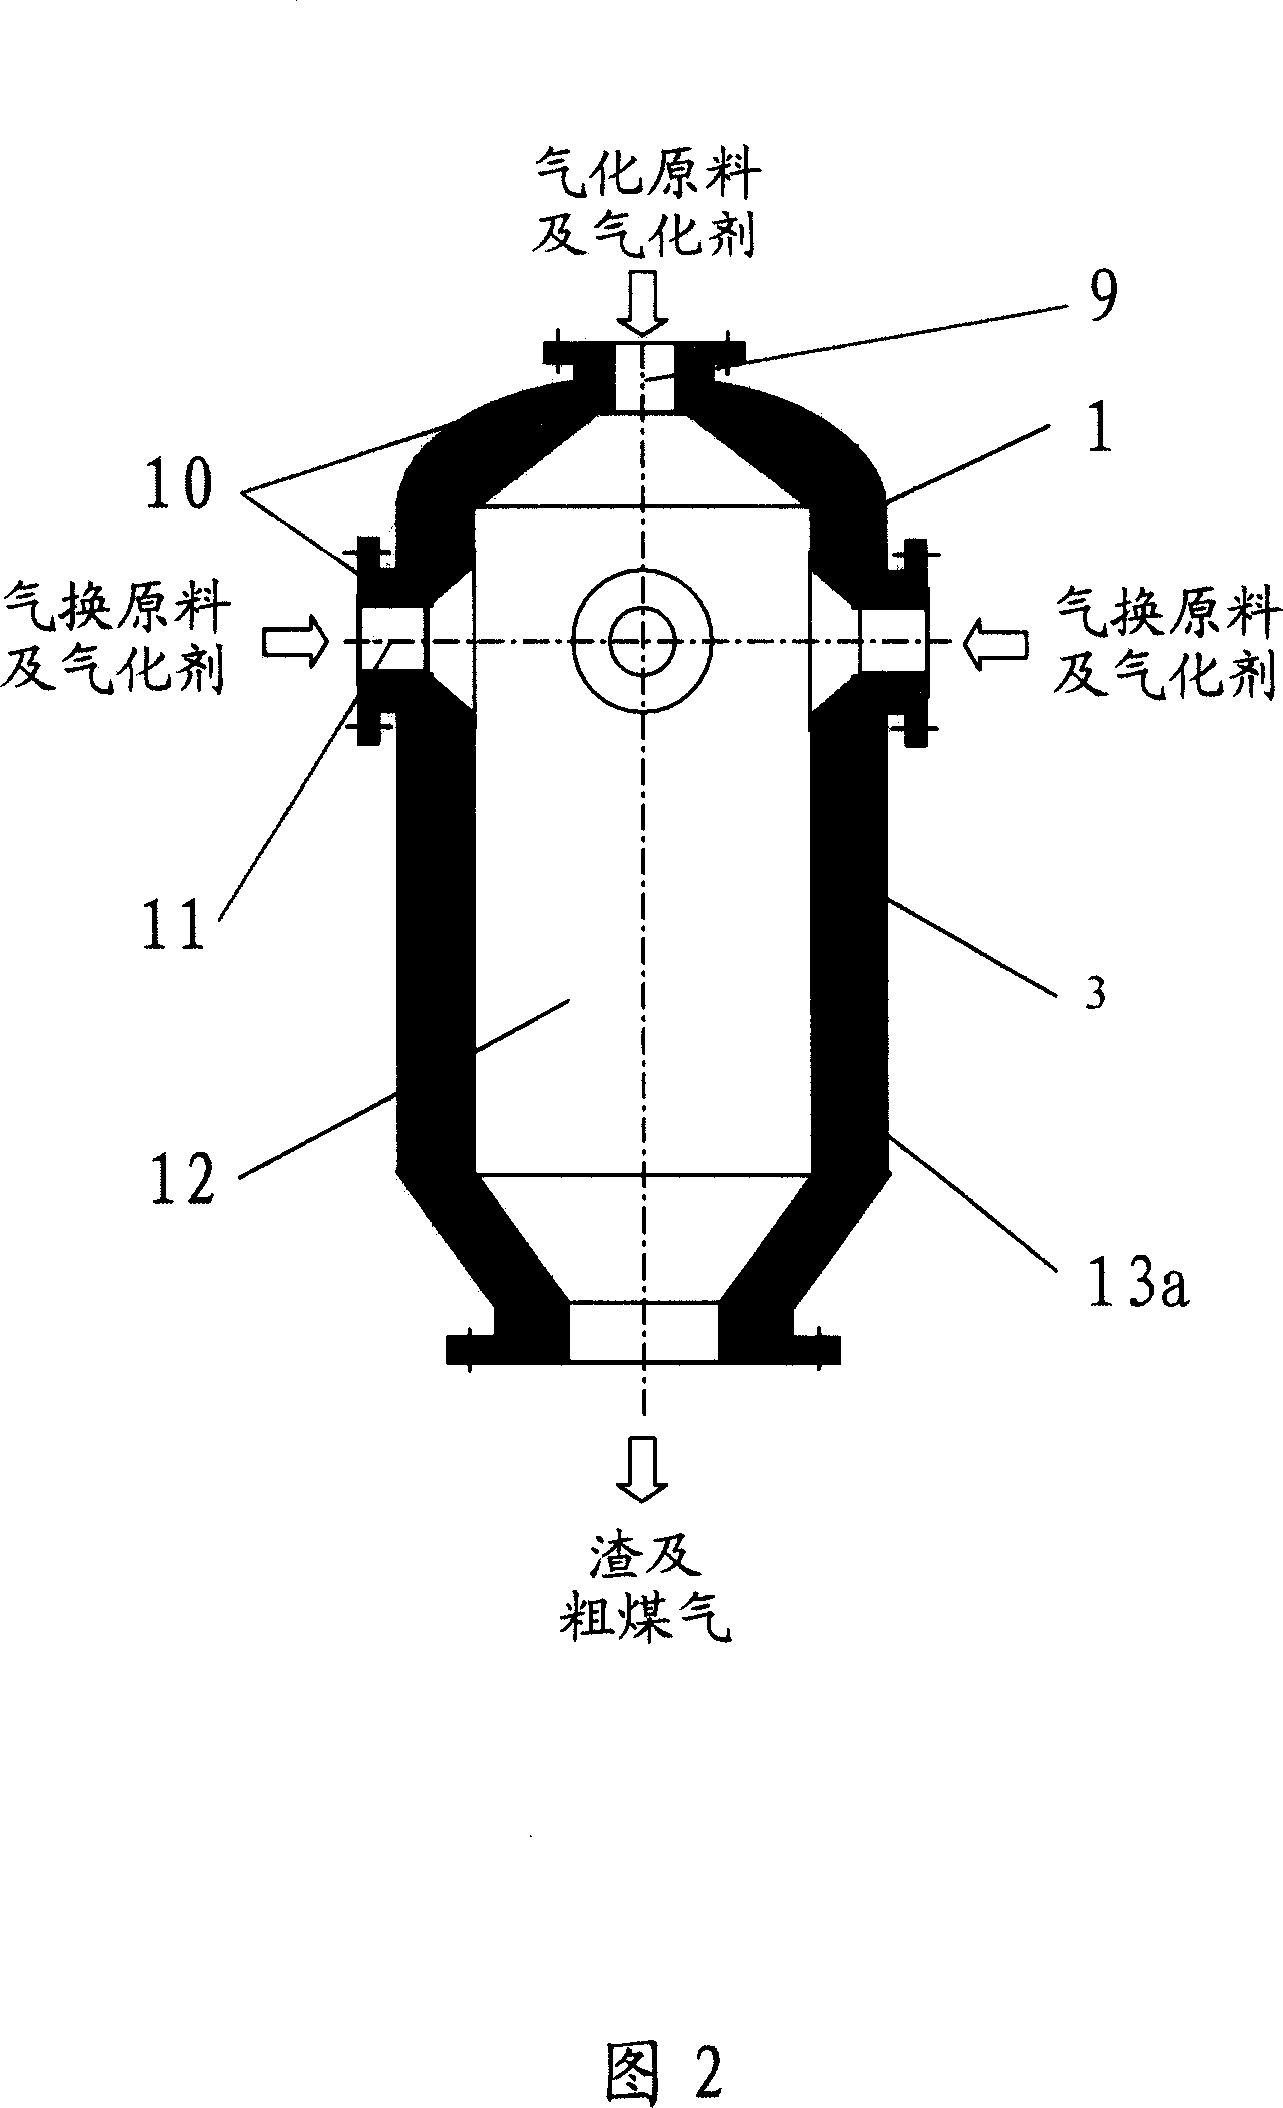 Gasification stove with multi nozzle, and gasification method